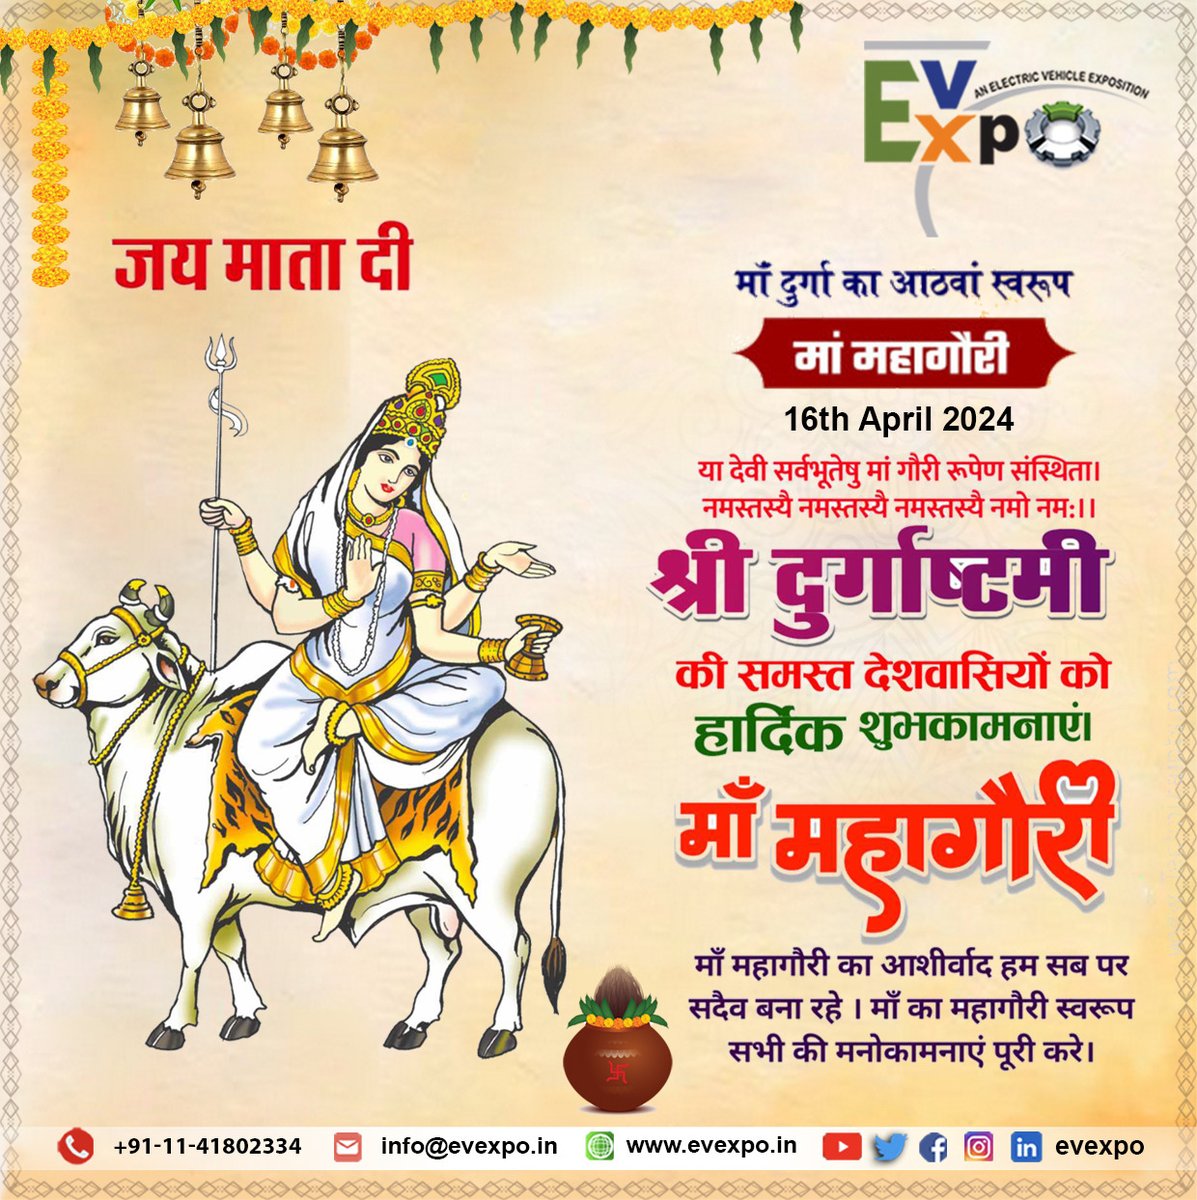 '🌸 Celebrating the divine grace of Maa Mahagouri on Shri Durgaashtami! 🌸 Join us at EvExpo for a soul-stirring homage to the embodiment of strength and compassion. 🙏 #mahagauri #DurgaAshtami #happyashtami #HappyNavratri #Navratri #blessed #Navratri2024 #NavratriSpecial